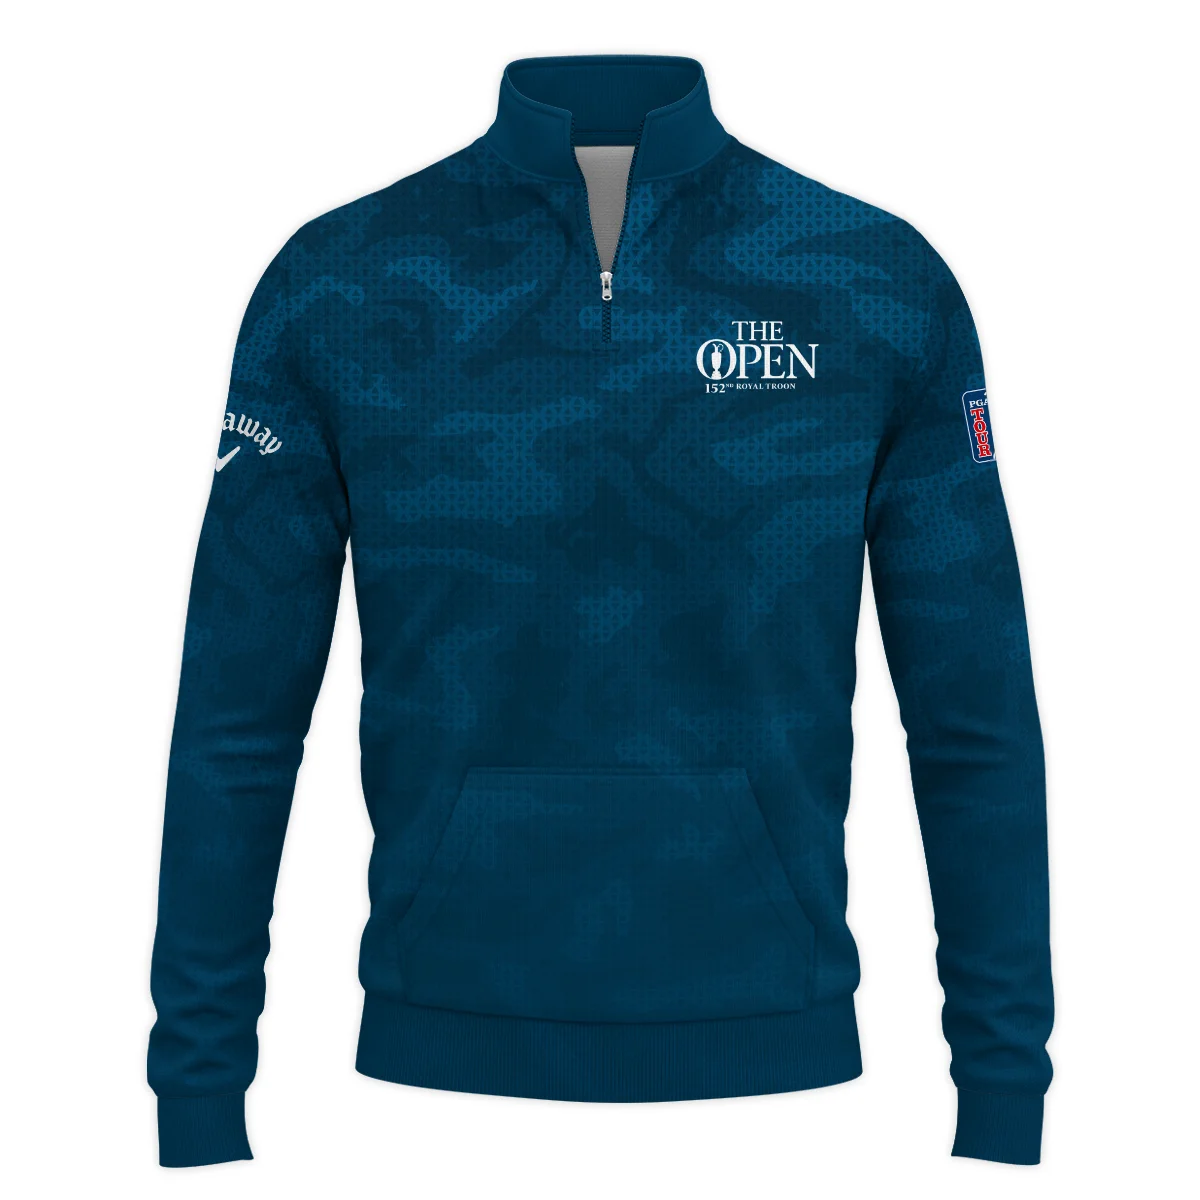 Callaway 152nd Open Championship Dark Blue Abstract Background Performance Quarter Zip Sweatshirt With Pockets All Over Prints HOTOP260624A02CLWTS